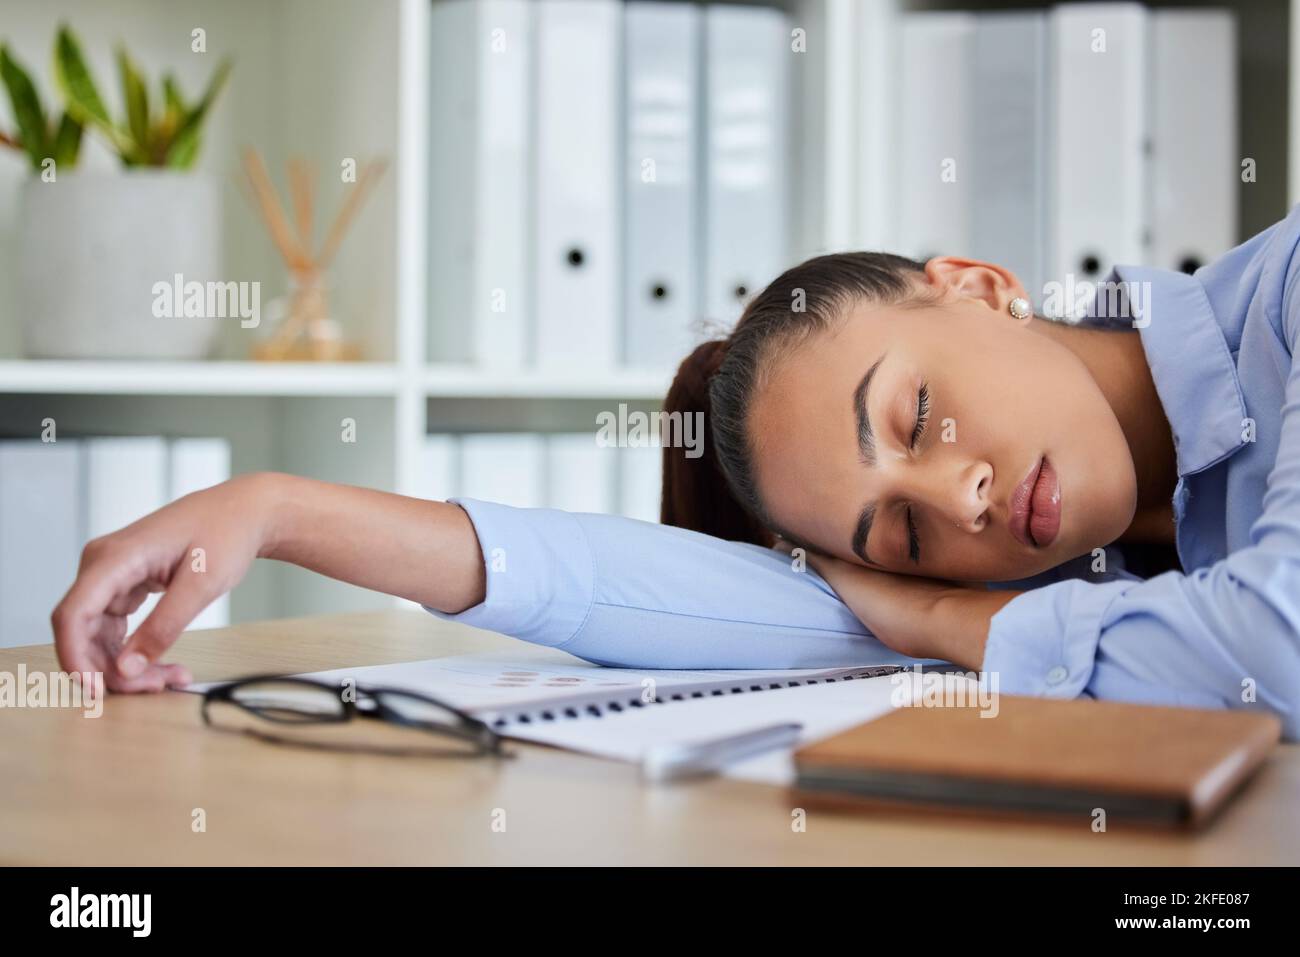 Tired, sleep and woman in business on her table feeling burnout and overworked while sleeping in her office. Nap, dreaming and exhausted with fatigue Stock Photo